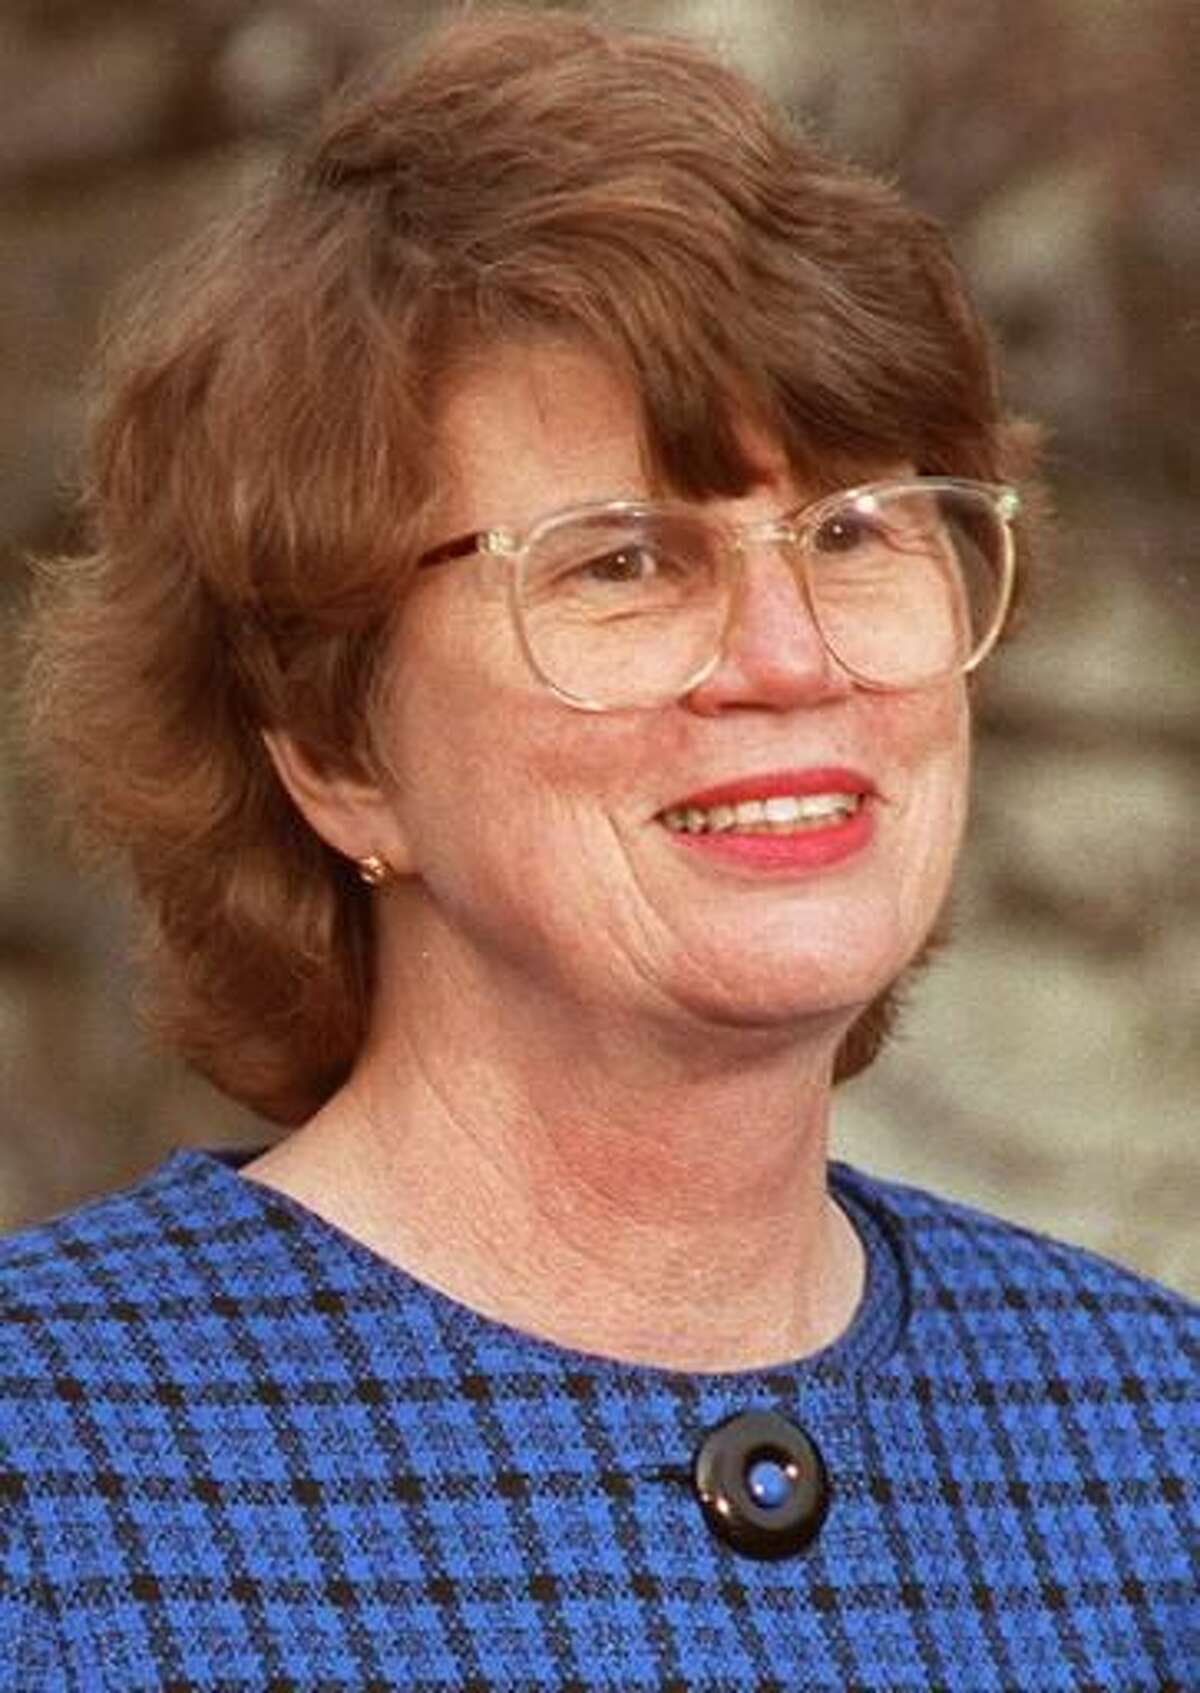 FILE -This 1993, file photo shows Attorney General Janet Reno. Reno, the first woman to serve as U.S. attorney general and the epicenter of several political storms during the Clinton administration, has died early Monday, Nov. 7, 2016. She was 78. (AP Photo/Doug Mills, File)